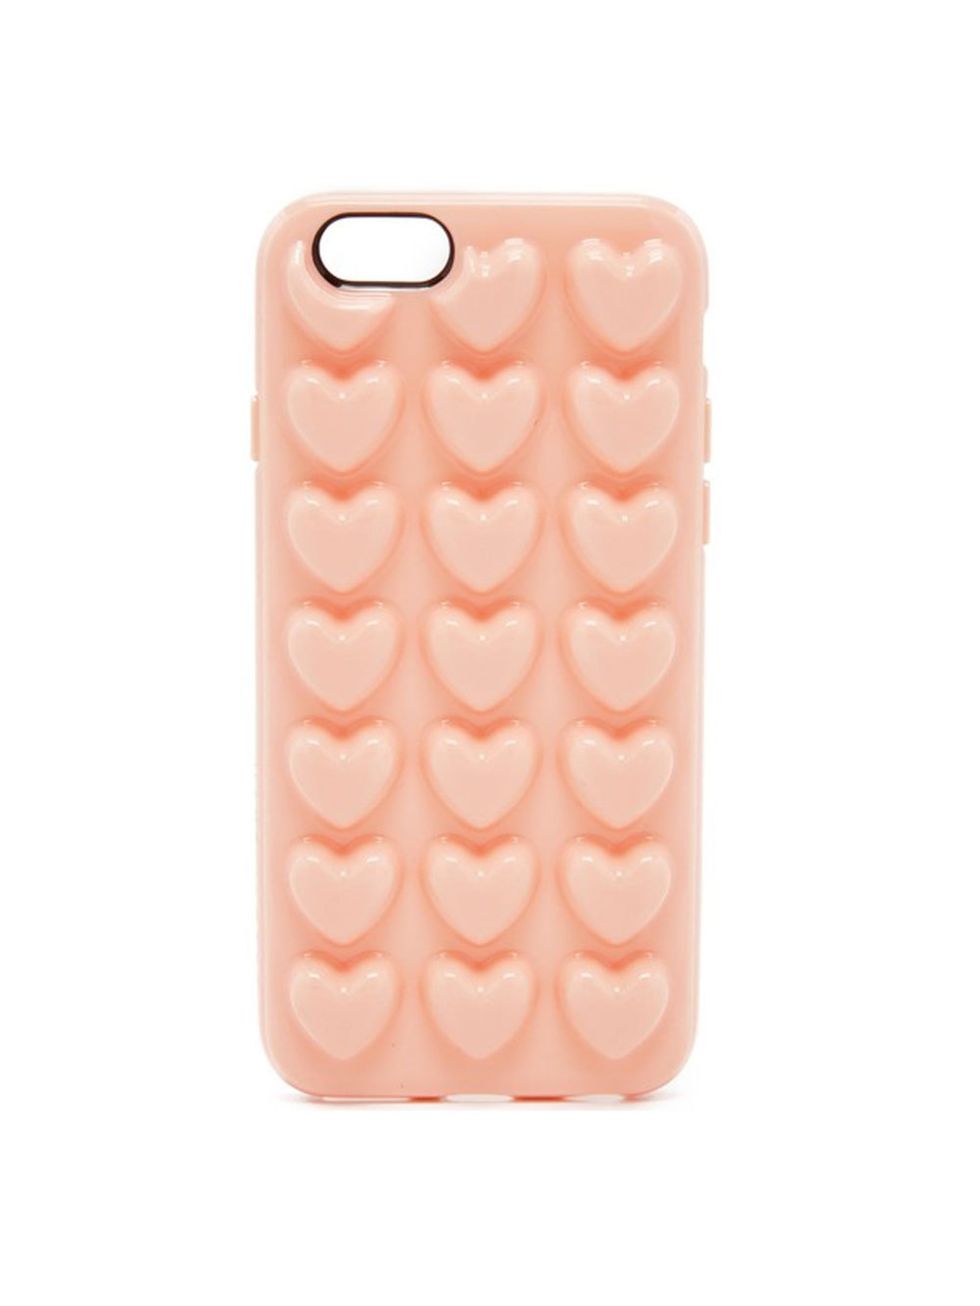 Pink, Peach, Plastic, Mobile phone accessories, Rectangle, Mobile phone case, Communication Device, 